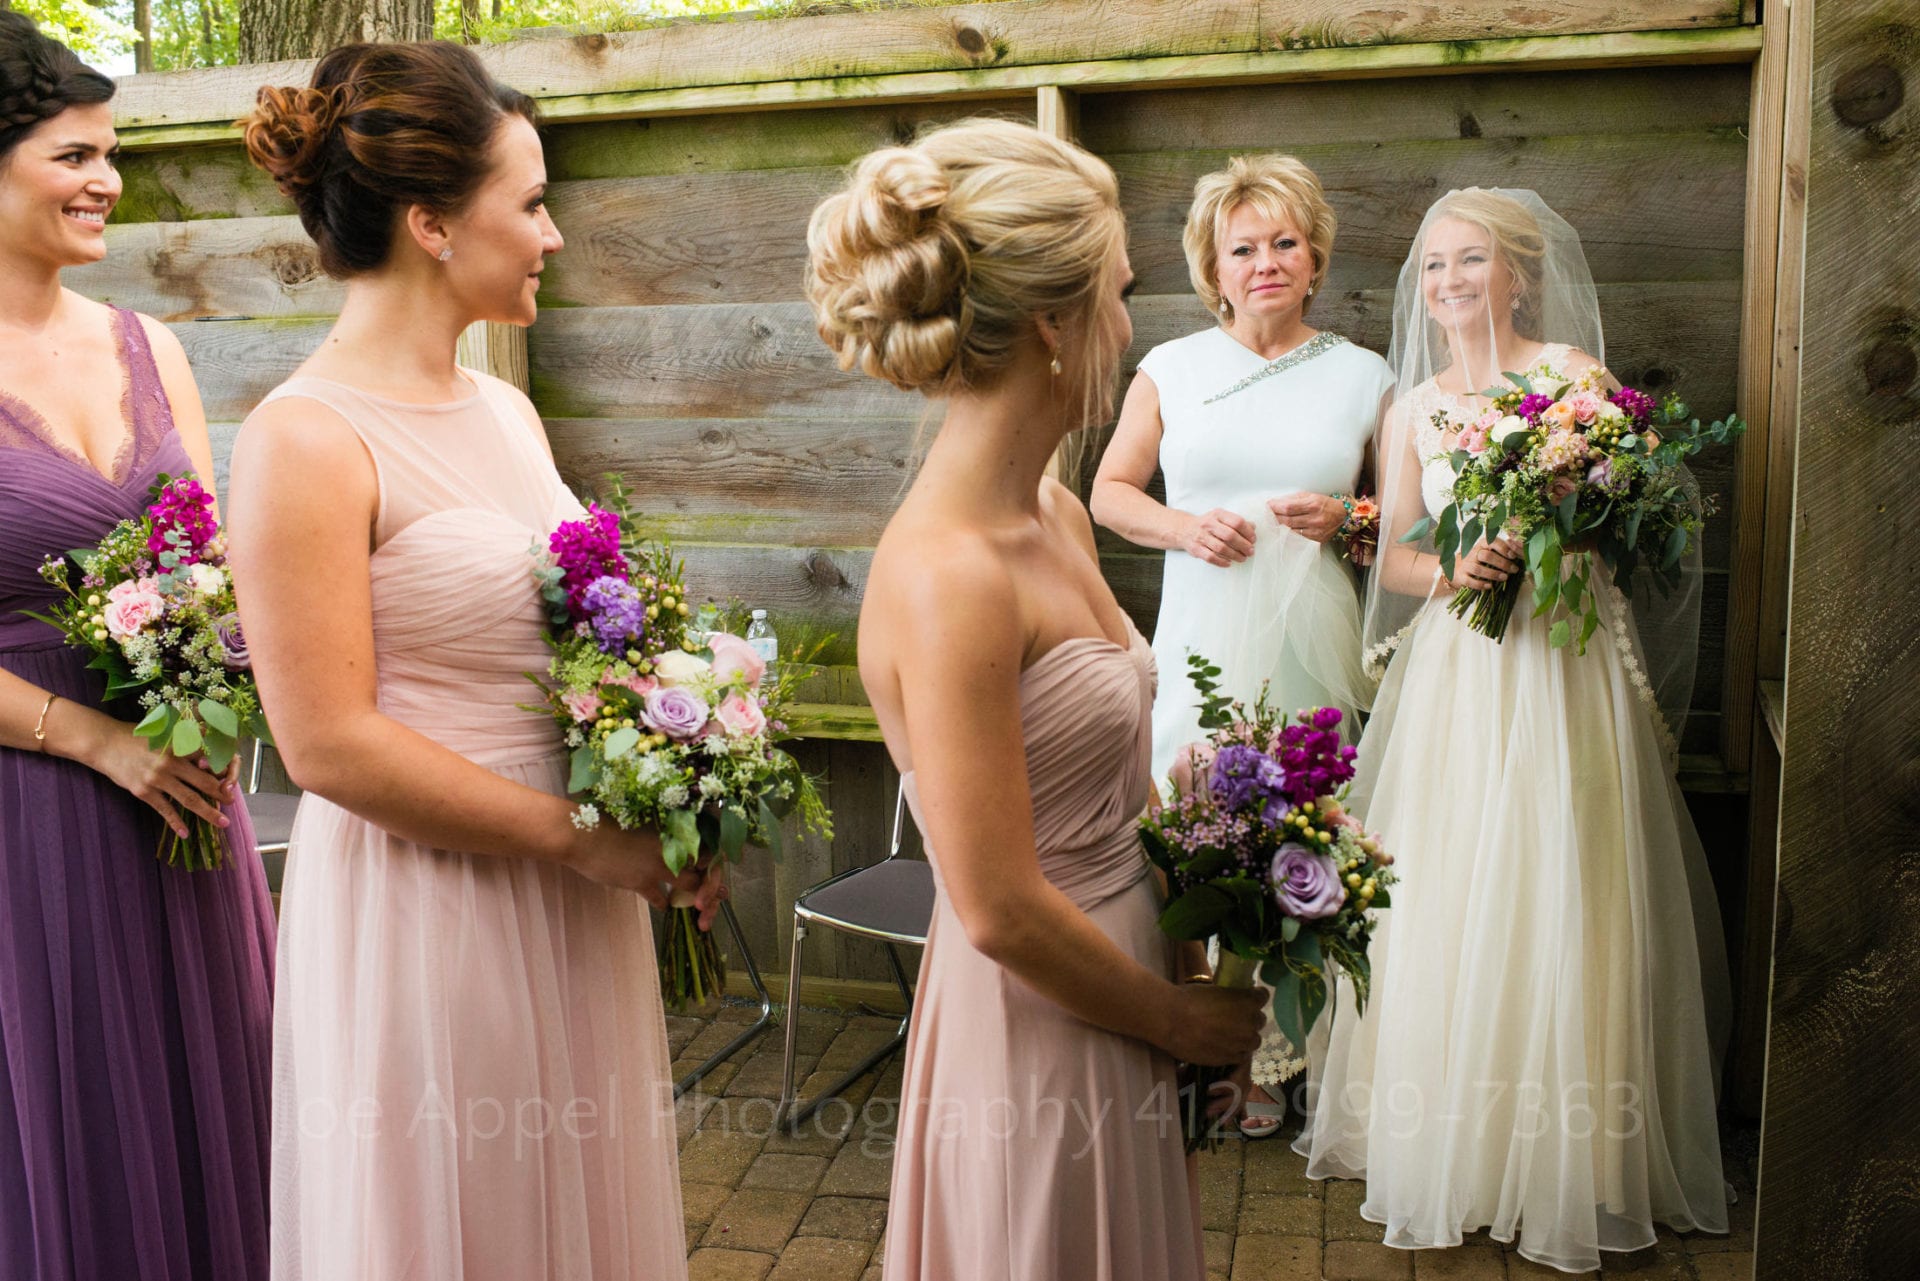 bridesmaids in pink and purple dresses with purple bouquets stand by a bride and her mother Seven Springs Weddings